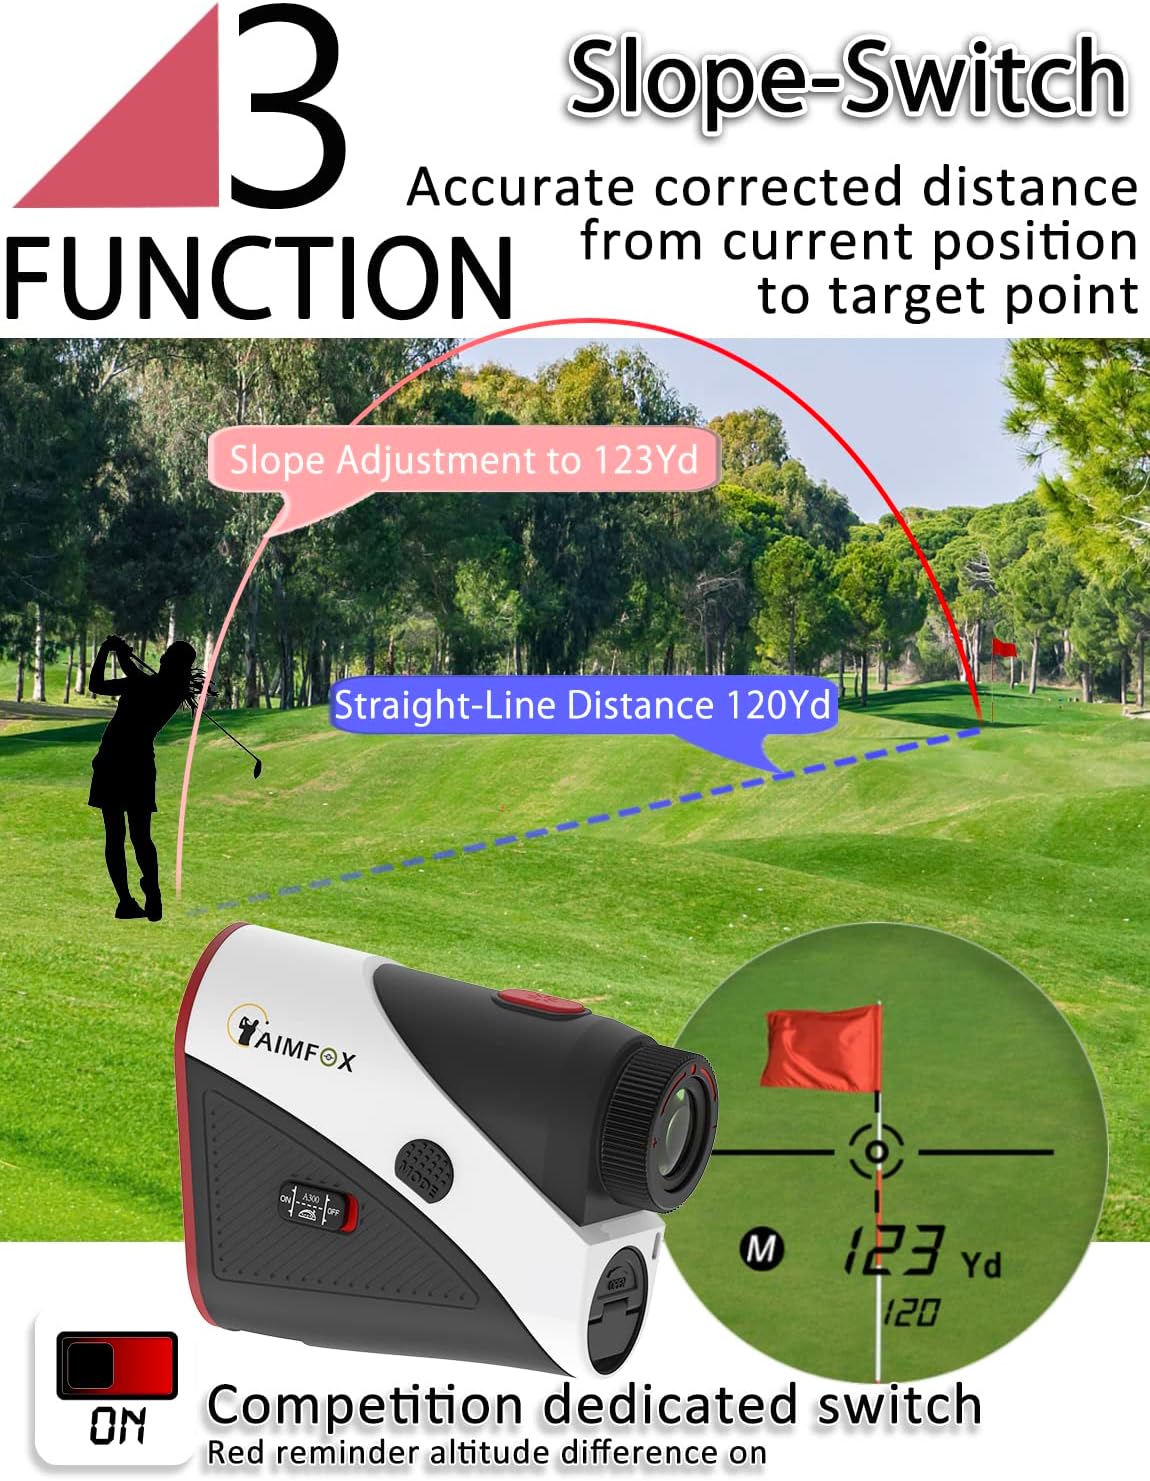 Aimfox A300 Golf Yardage Rangefinder with Slope Switch, Rubber Surface Mini Portable Laser Distance Range Finder, Wide View, More Accurate and Fast Focus System, Designed for Professional Golfers